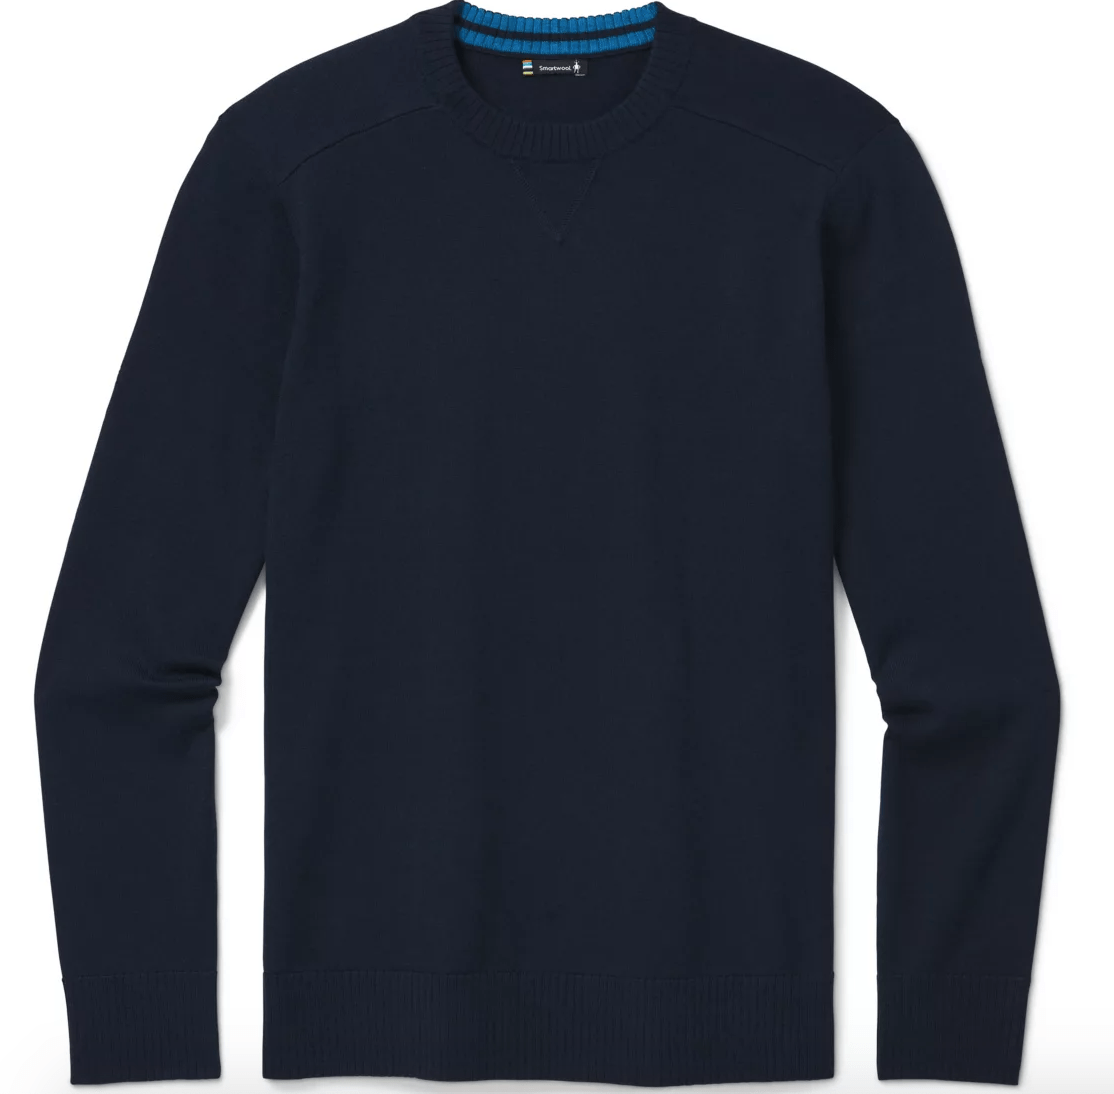 Smartwool Sweater L / Deep Navy Heather Smartwool Sparwood Crew Sweater M's